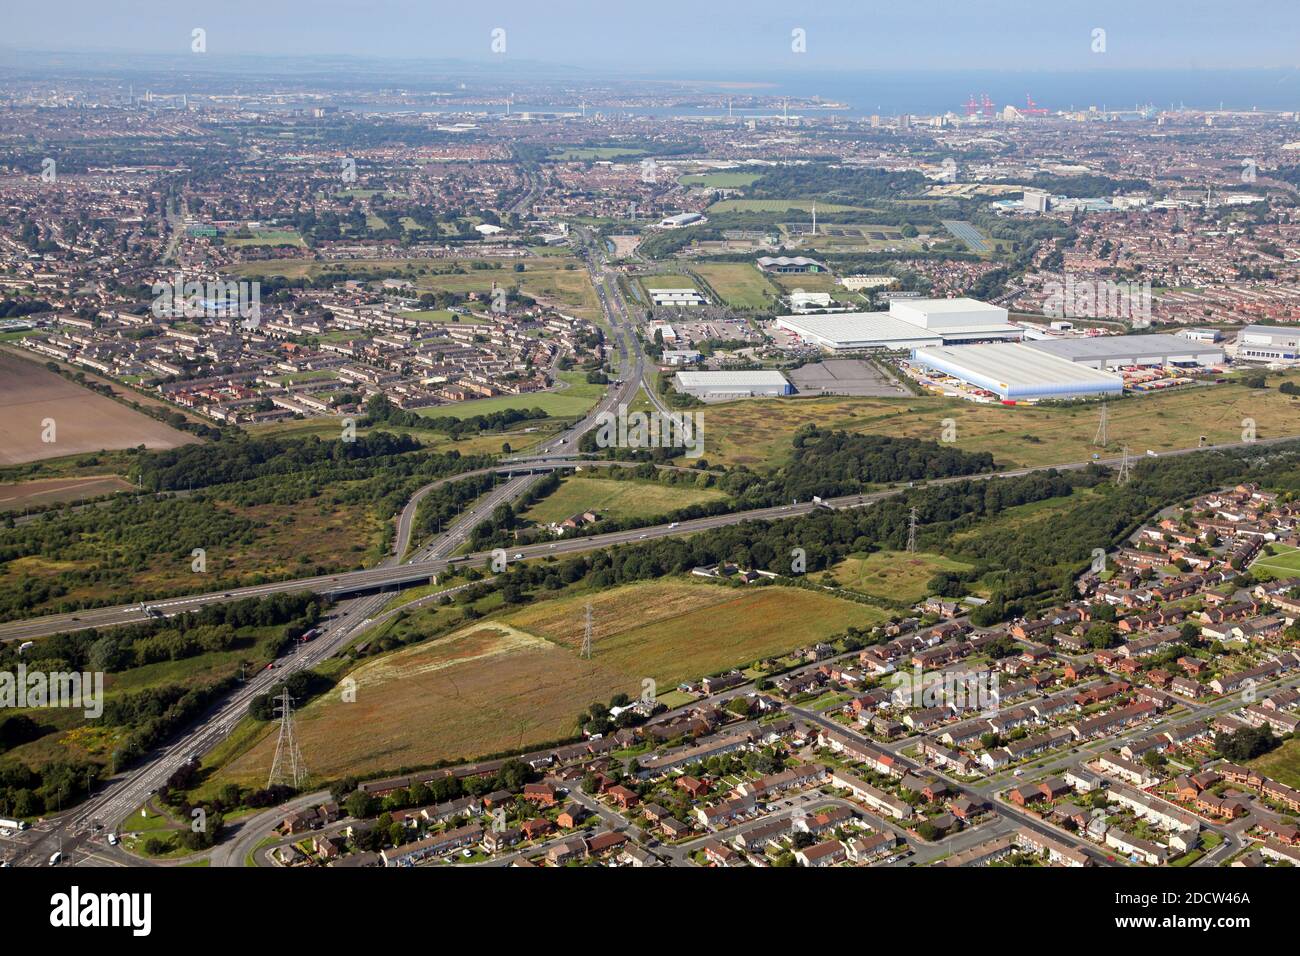 aerial view looking west along the East Lancs Road as it crosses the M57 motorway near Knowsley & Kirkby, Liverpool. Stock Photo